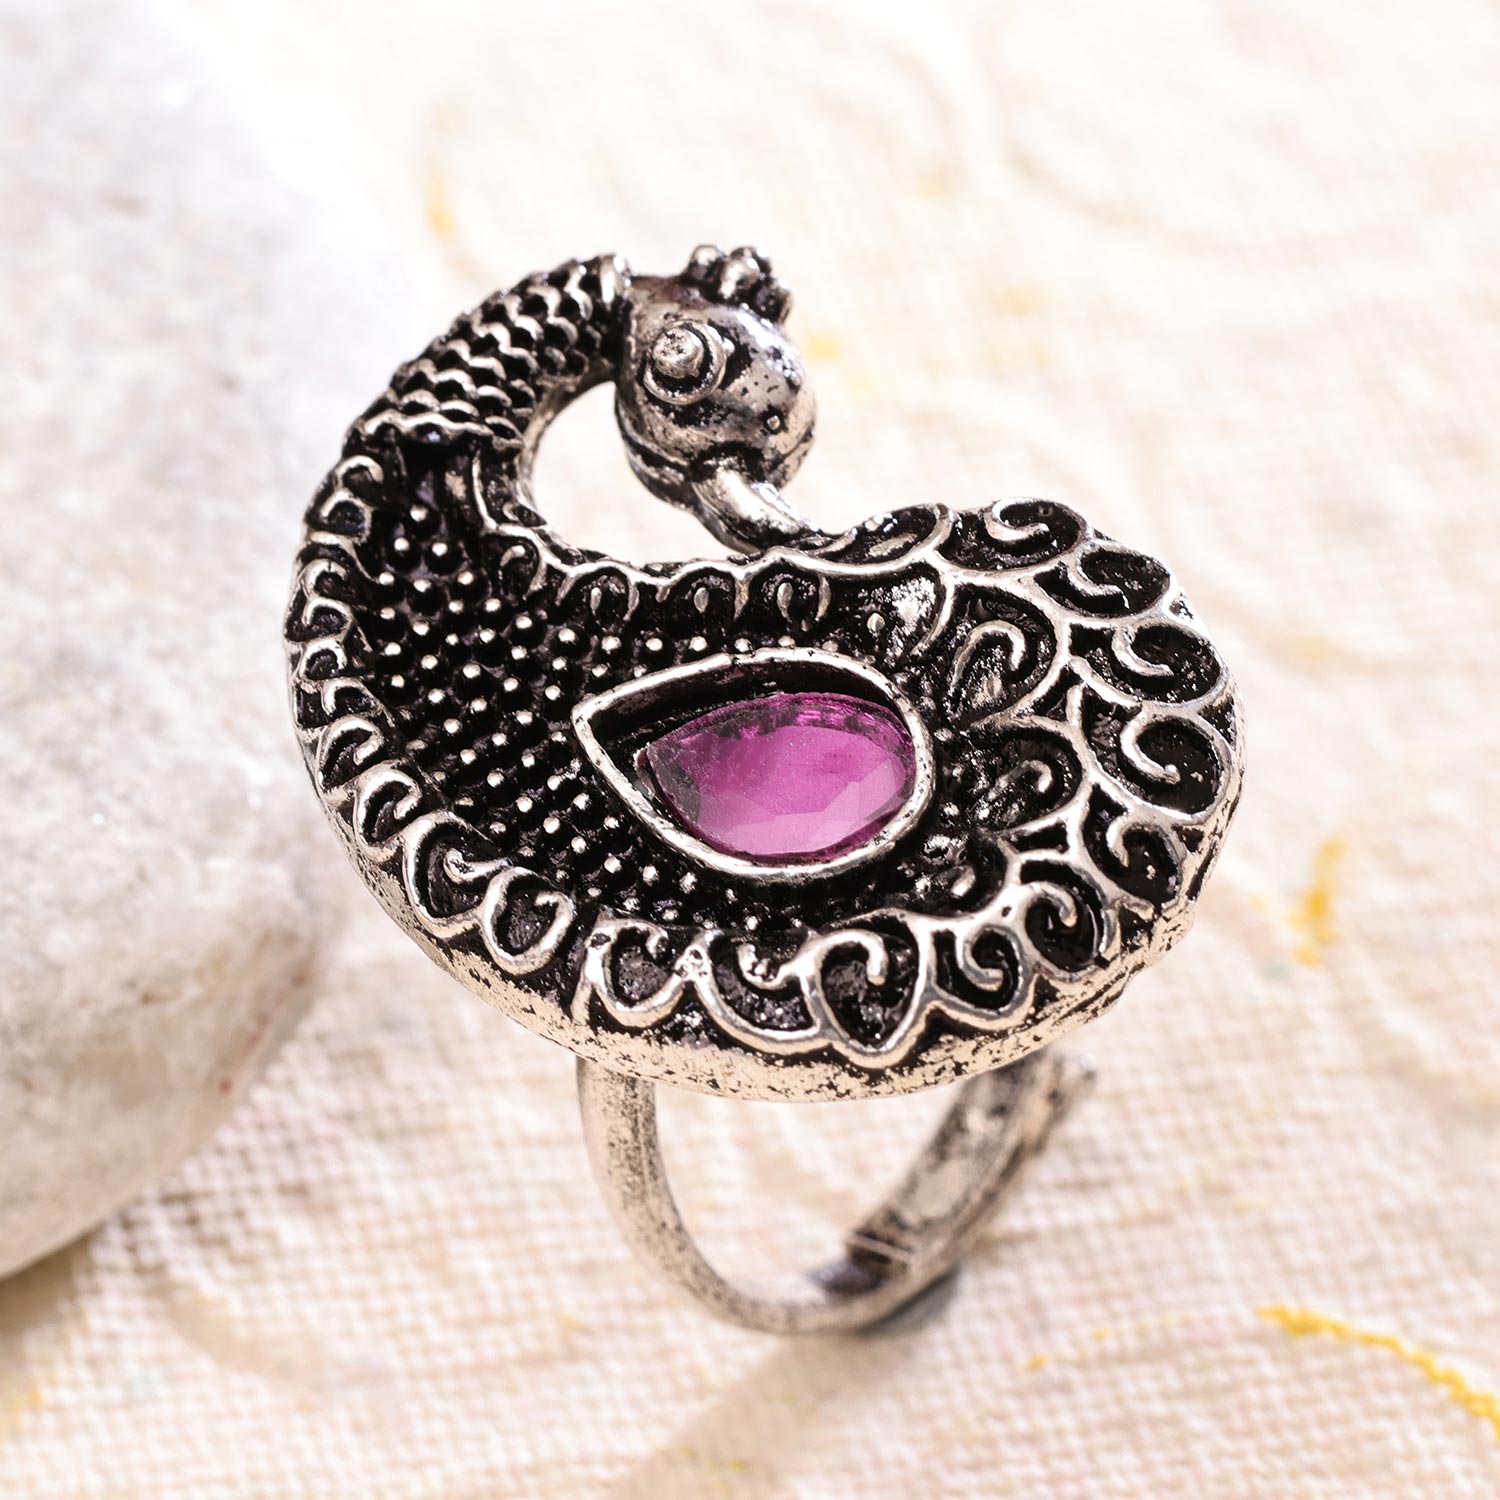 Magnificent Peacock Ring with Ornate Indian Design